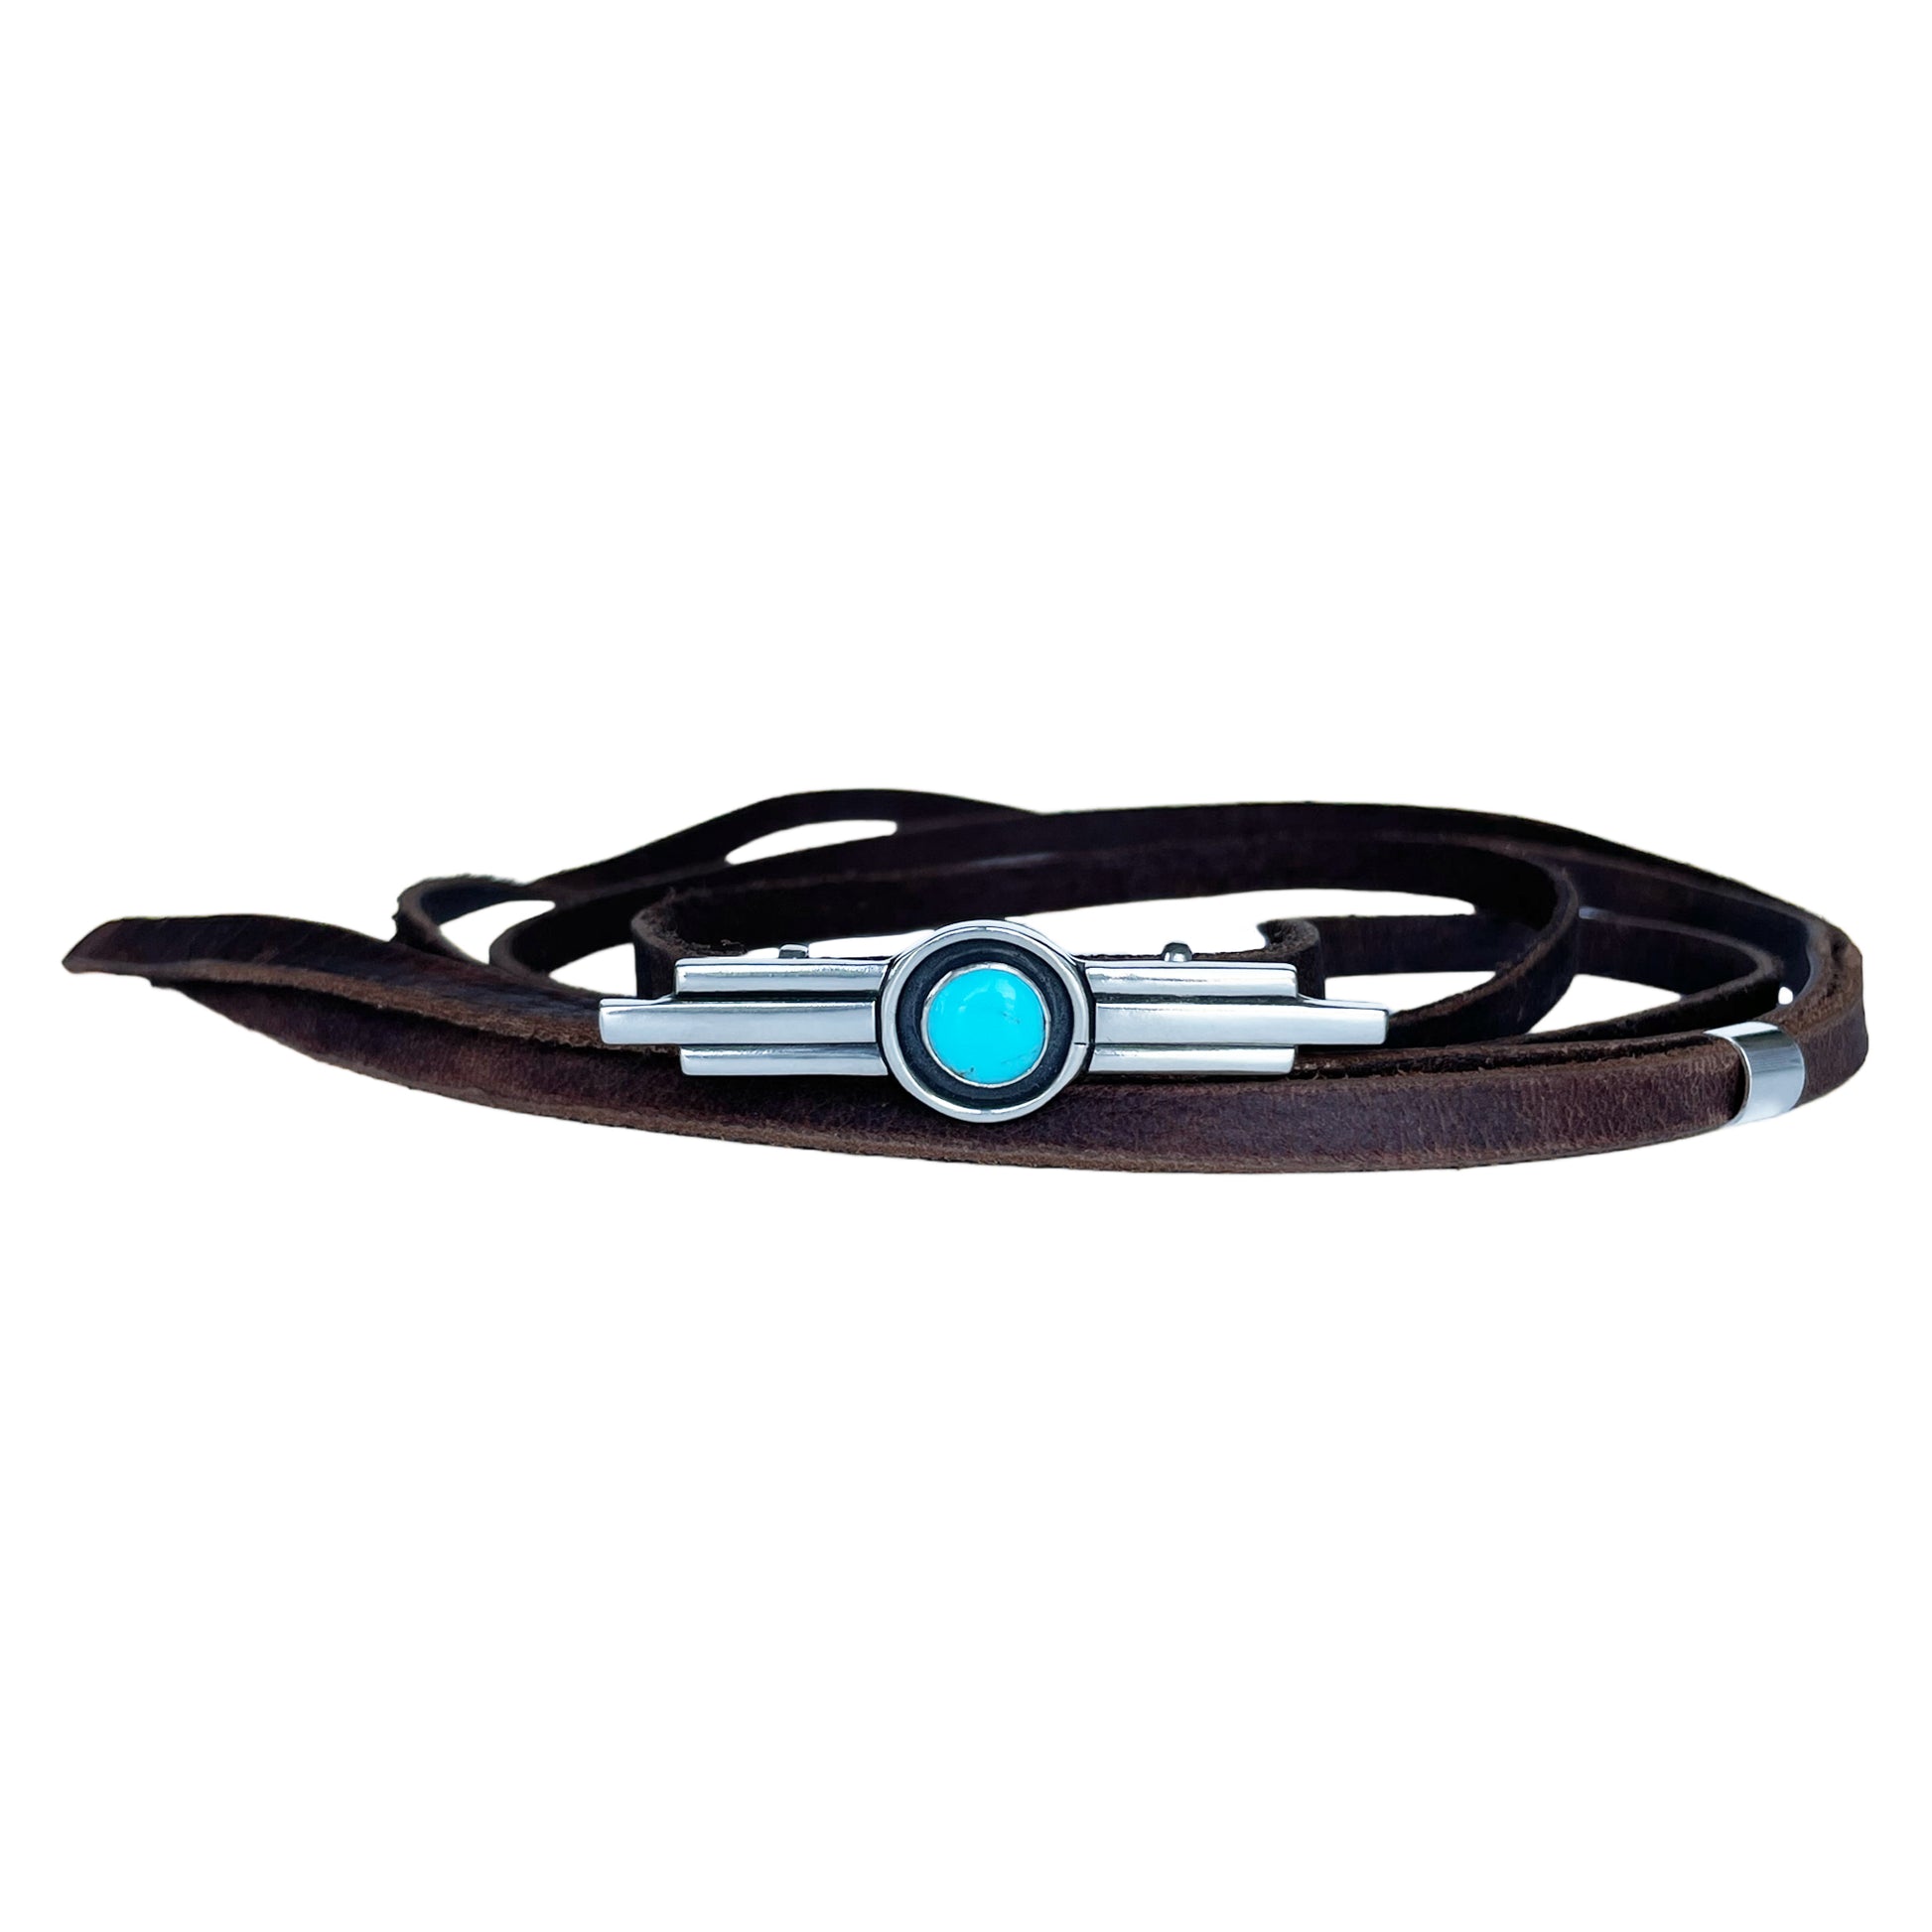 Thin brown leather hat band featuring a sterling silver hat pin with 3 bar design with the middle bar slightly longer than the 2 side bars. The middle contains a round turquoise stone encircled with a black patina.